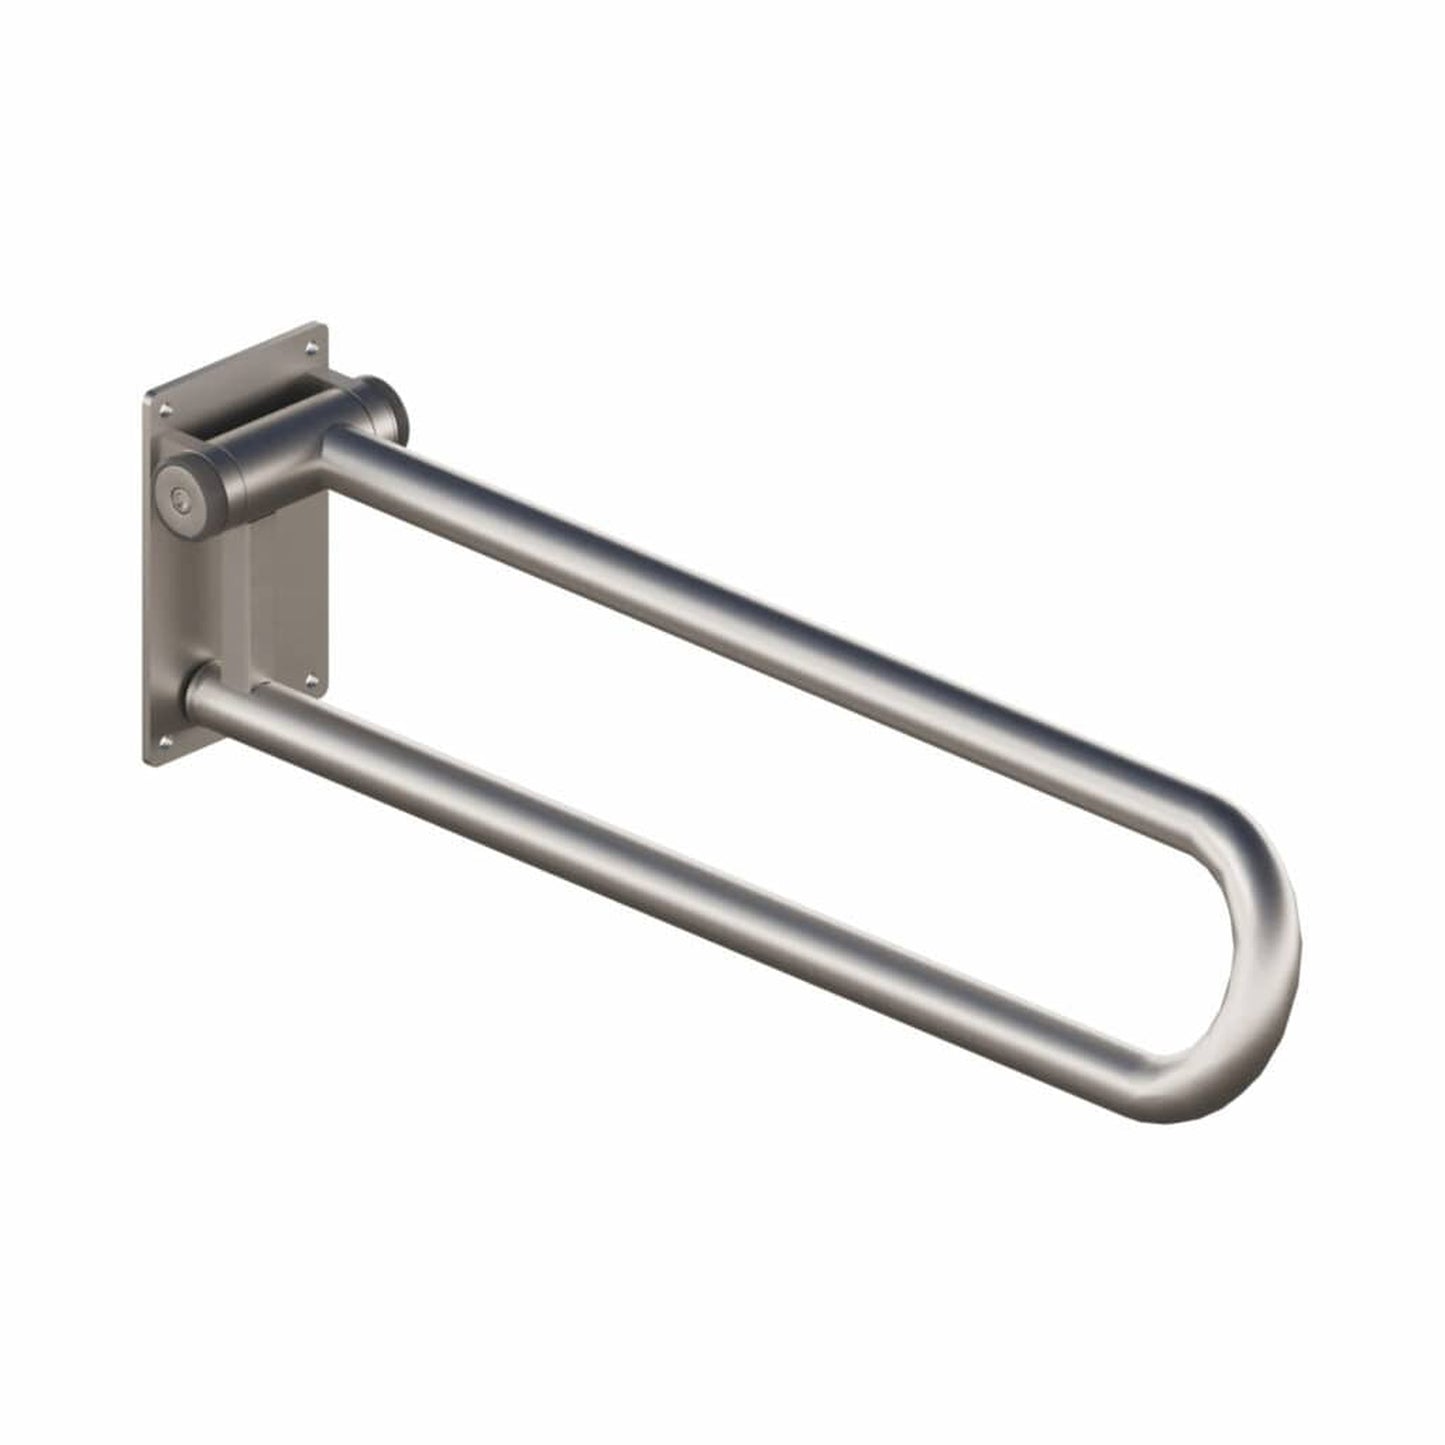 HealthCraft PT Rail 32" Stainless Steel Left and Right Side Grab Bar